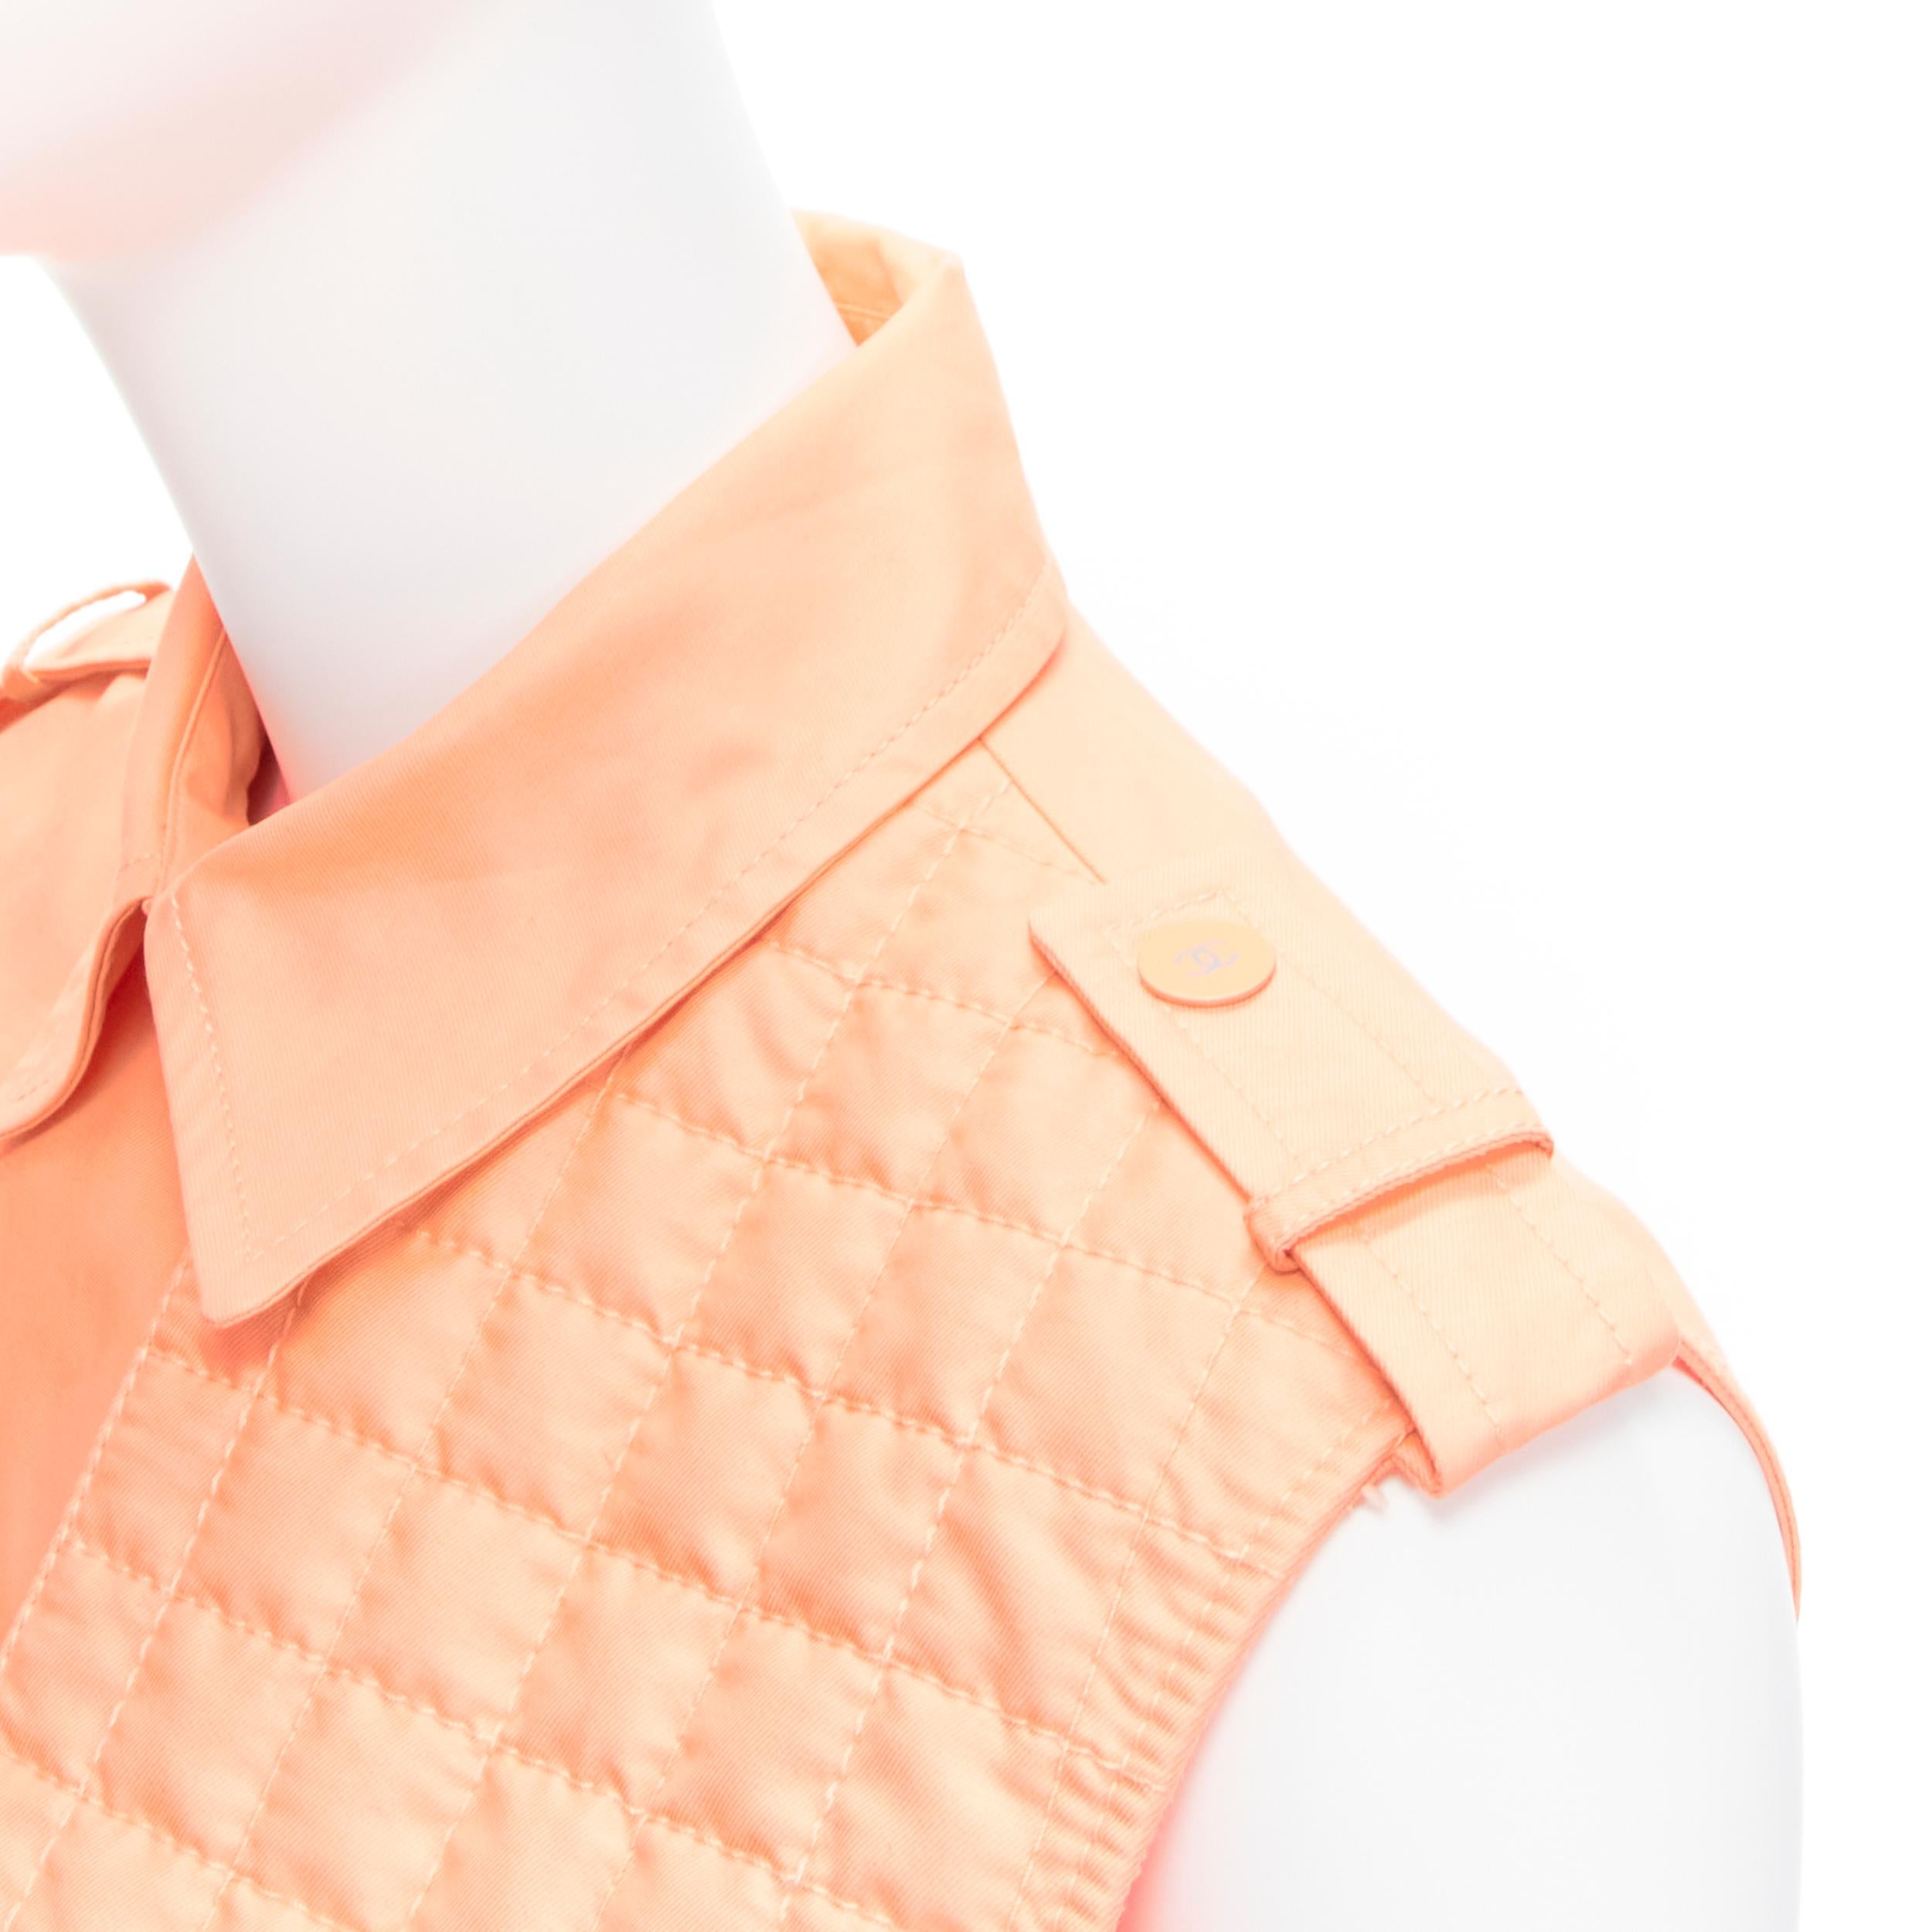 CHANEL 00T apricot orange CC button quilted panel cropped vest FR38 M
Reference: TGAS/C02015
Brand: Chanel
Designer: Karl Lagerfeld
Collection: 00T
Material: Cotton, Polyamide
Color: Orange
Pattern: Solid
Closure: Snap Buttons
Extra Details: CC logo